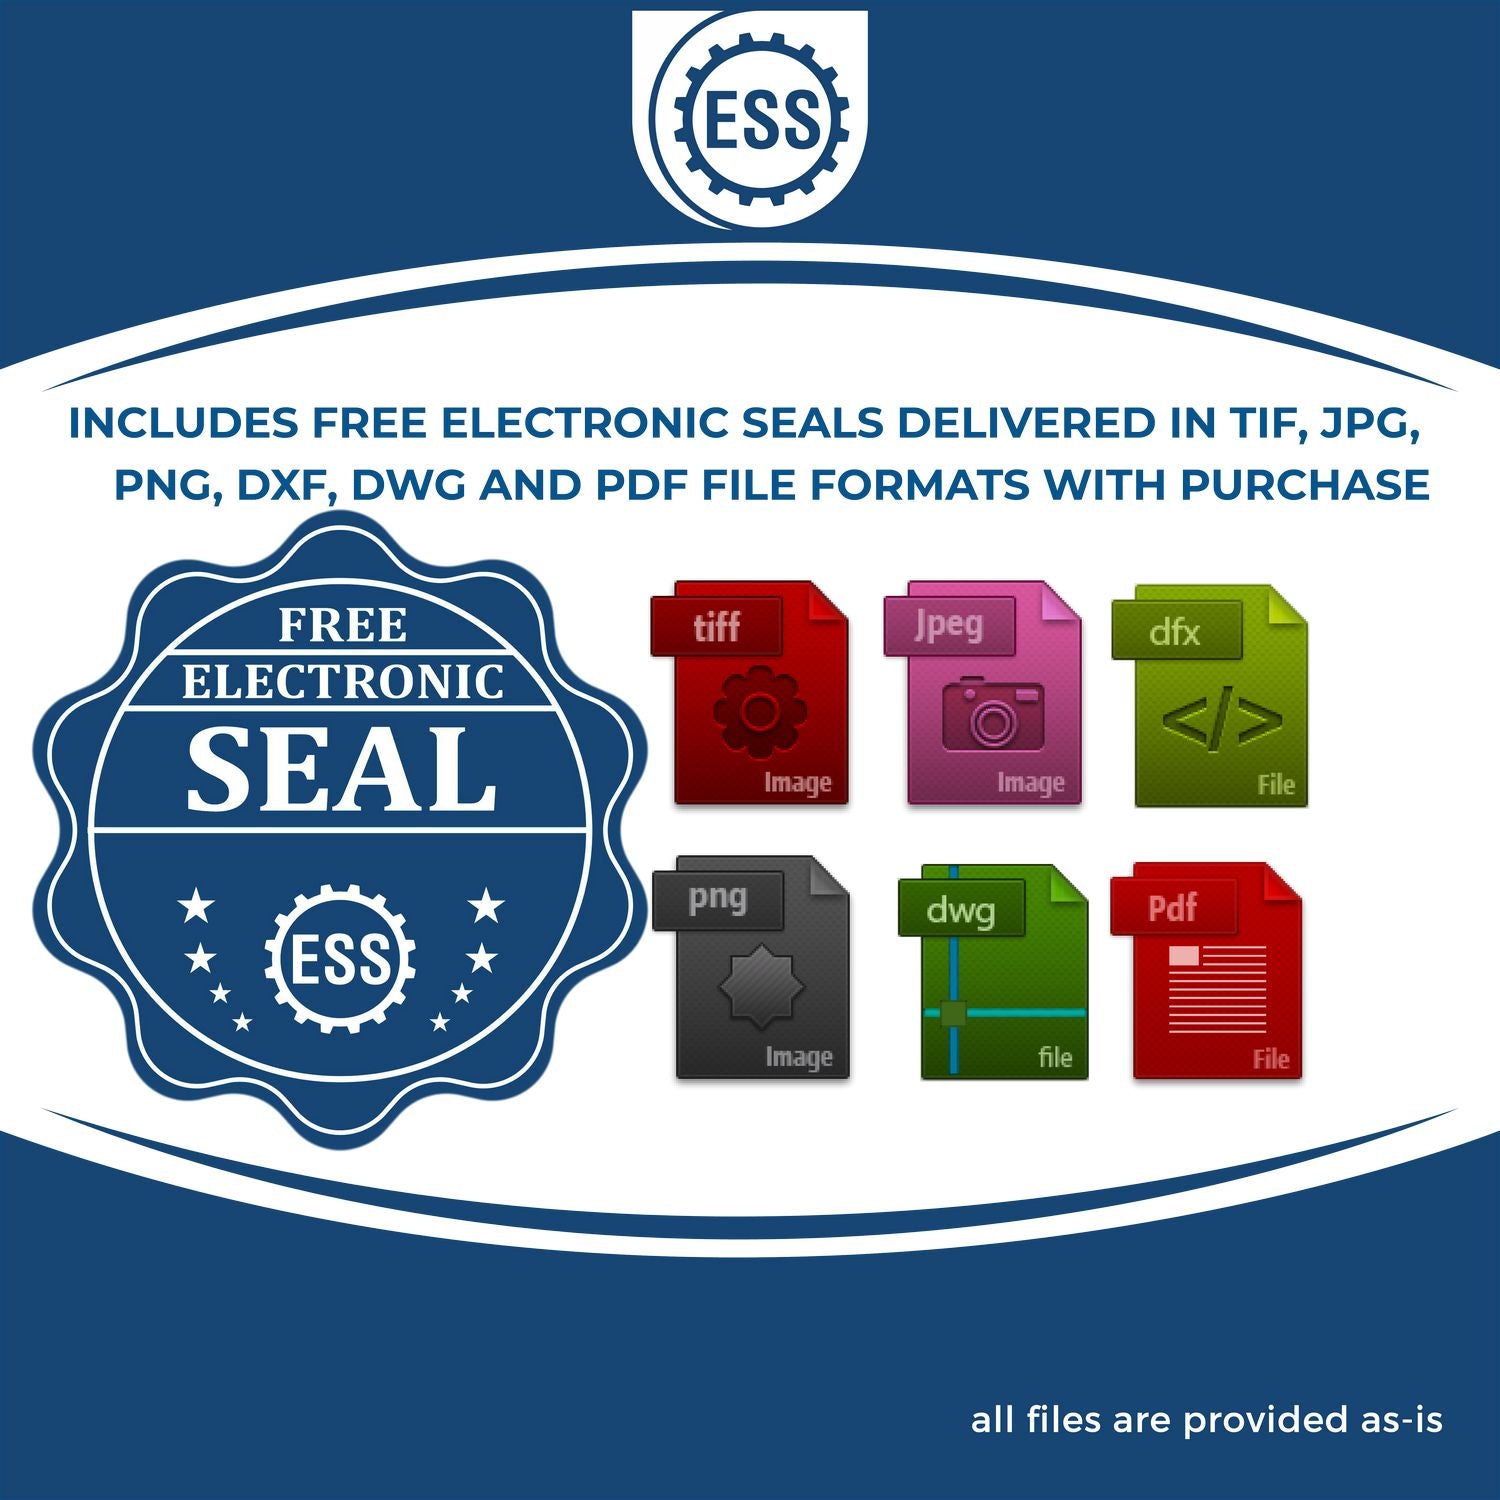 An infographic for the free electronic seal for the Heavy Duty Cast Iron Colorado Engineer Seal Embosser illustrating the different file type icons such as DXF, DWG, TIF, JPG and PNG.